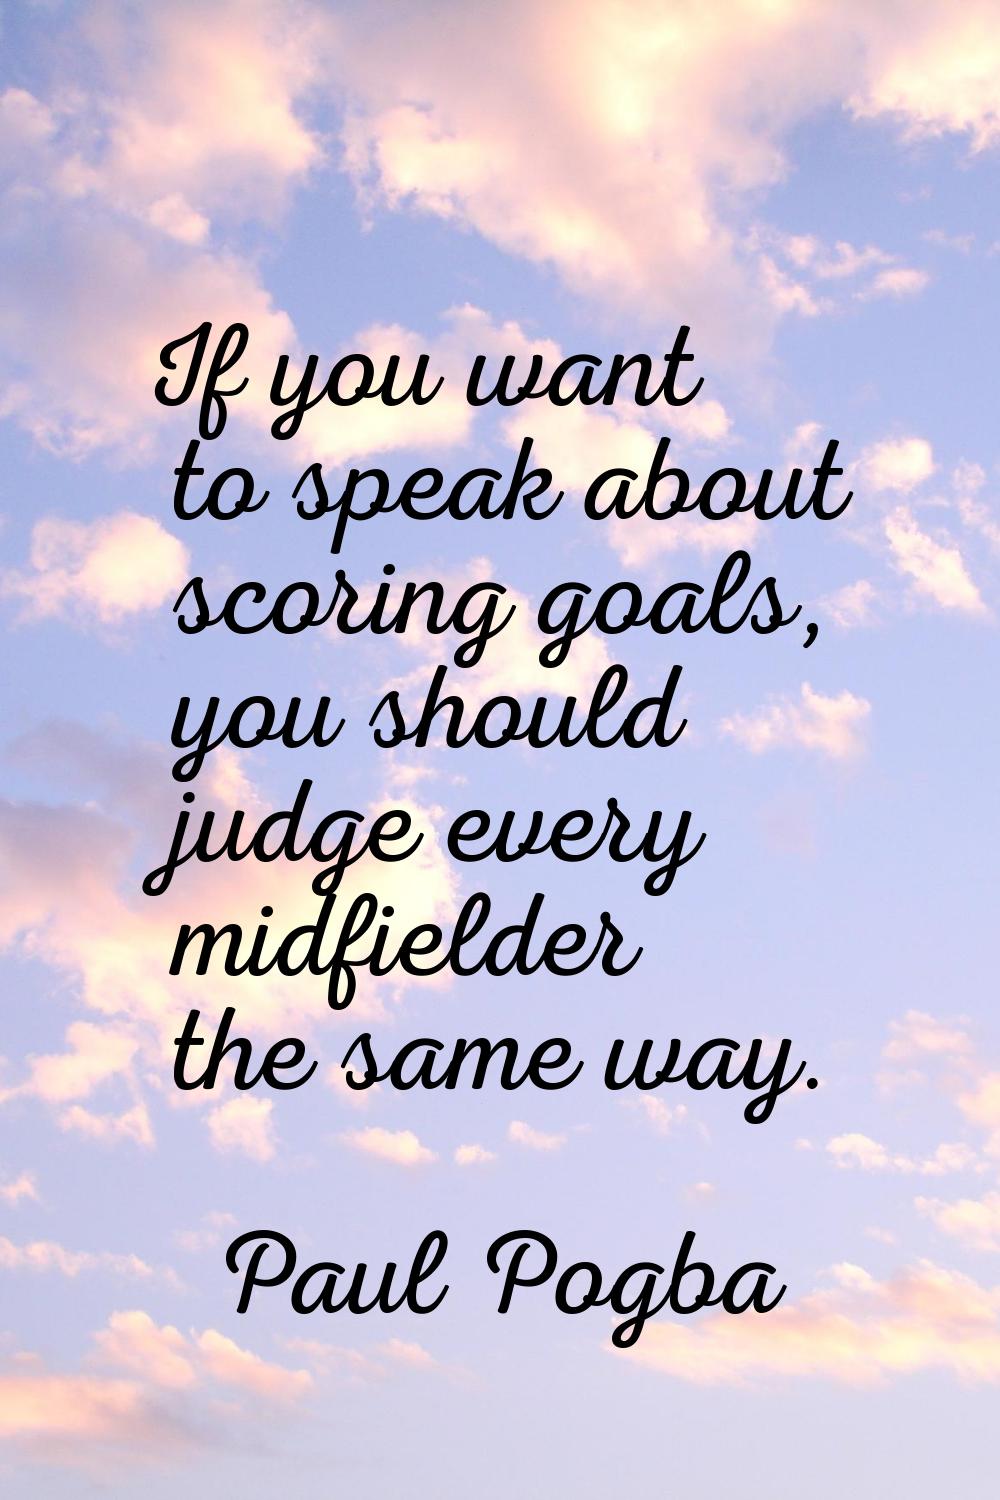 If you want to speak about scoring goals, you should judge every midfielder the same way.